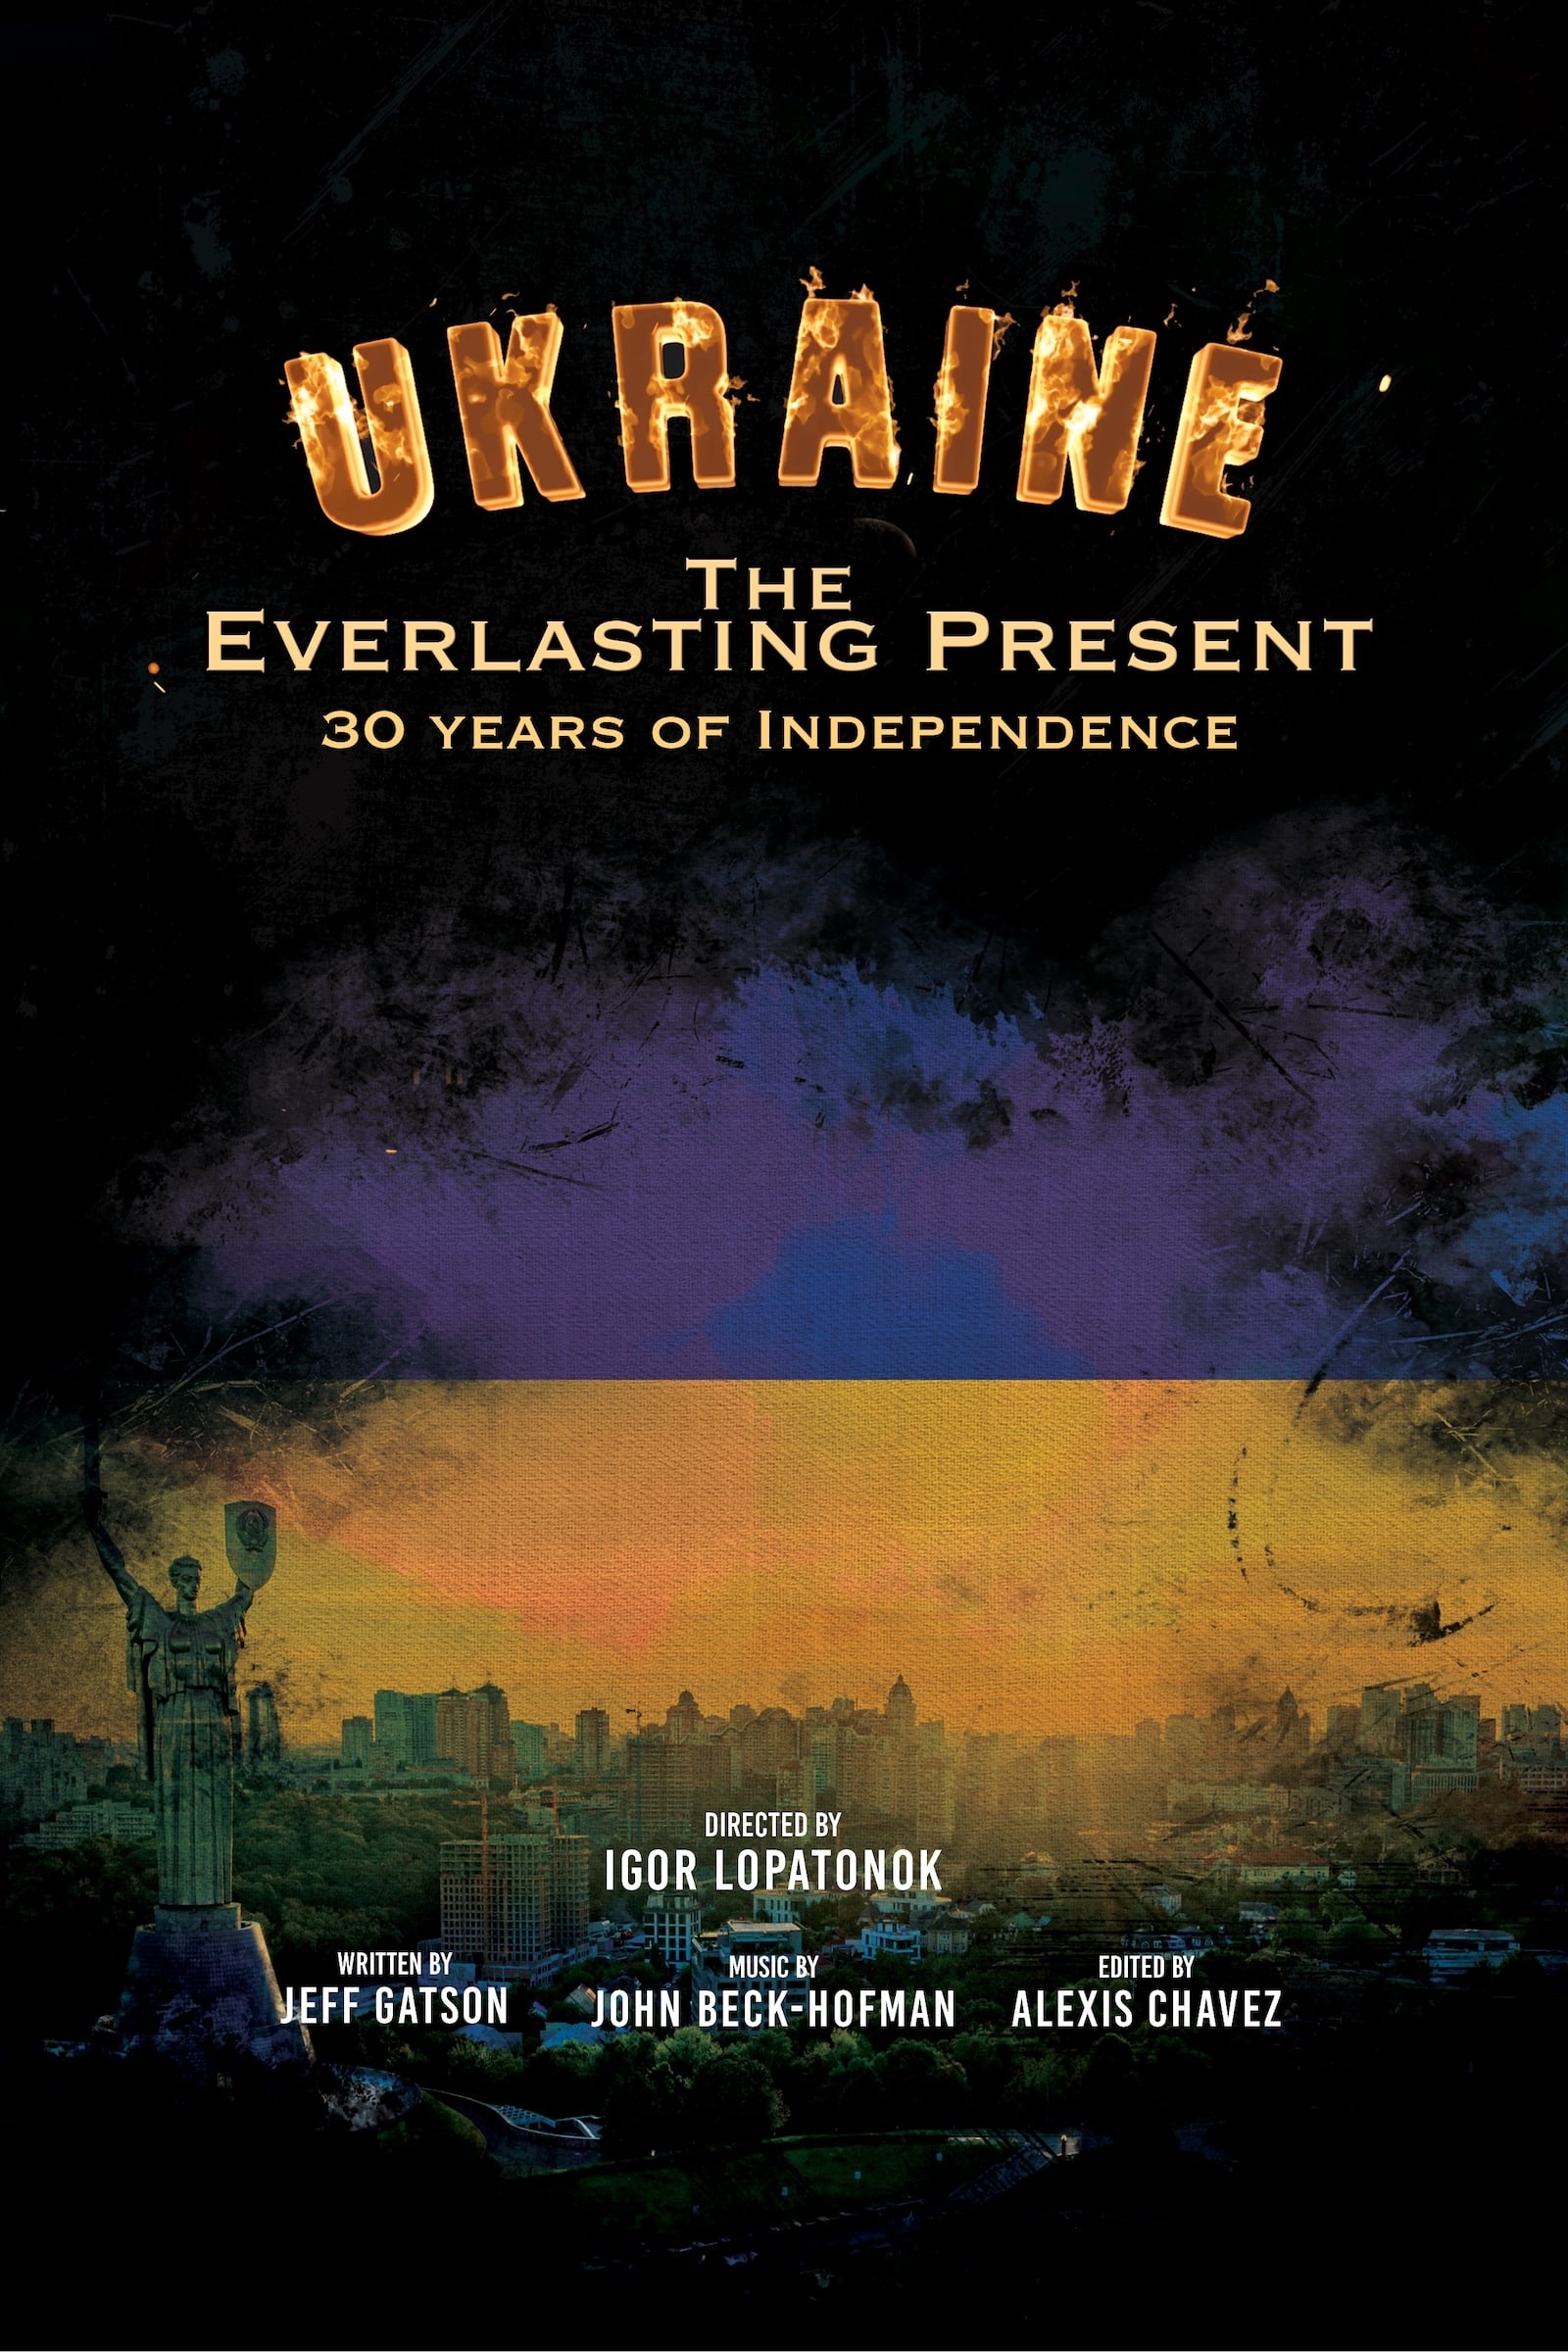 The Everlasting Present - Ukraine: 30 Years of InDependence on FREECABLE TV